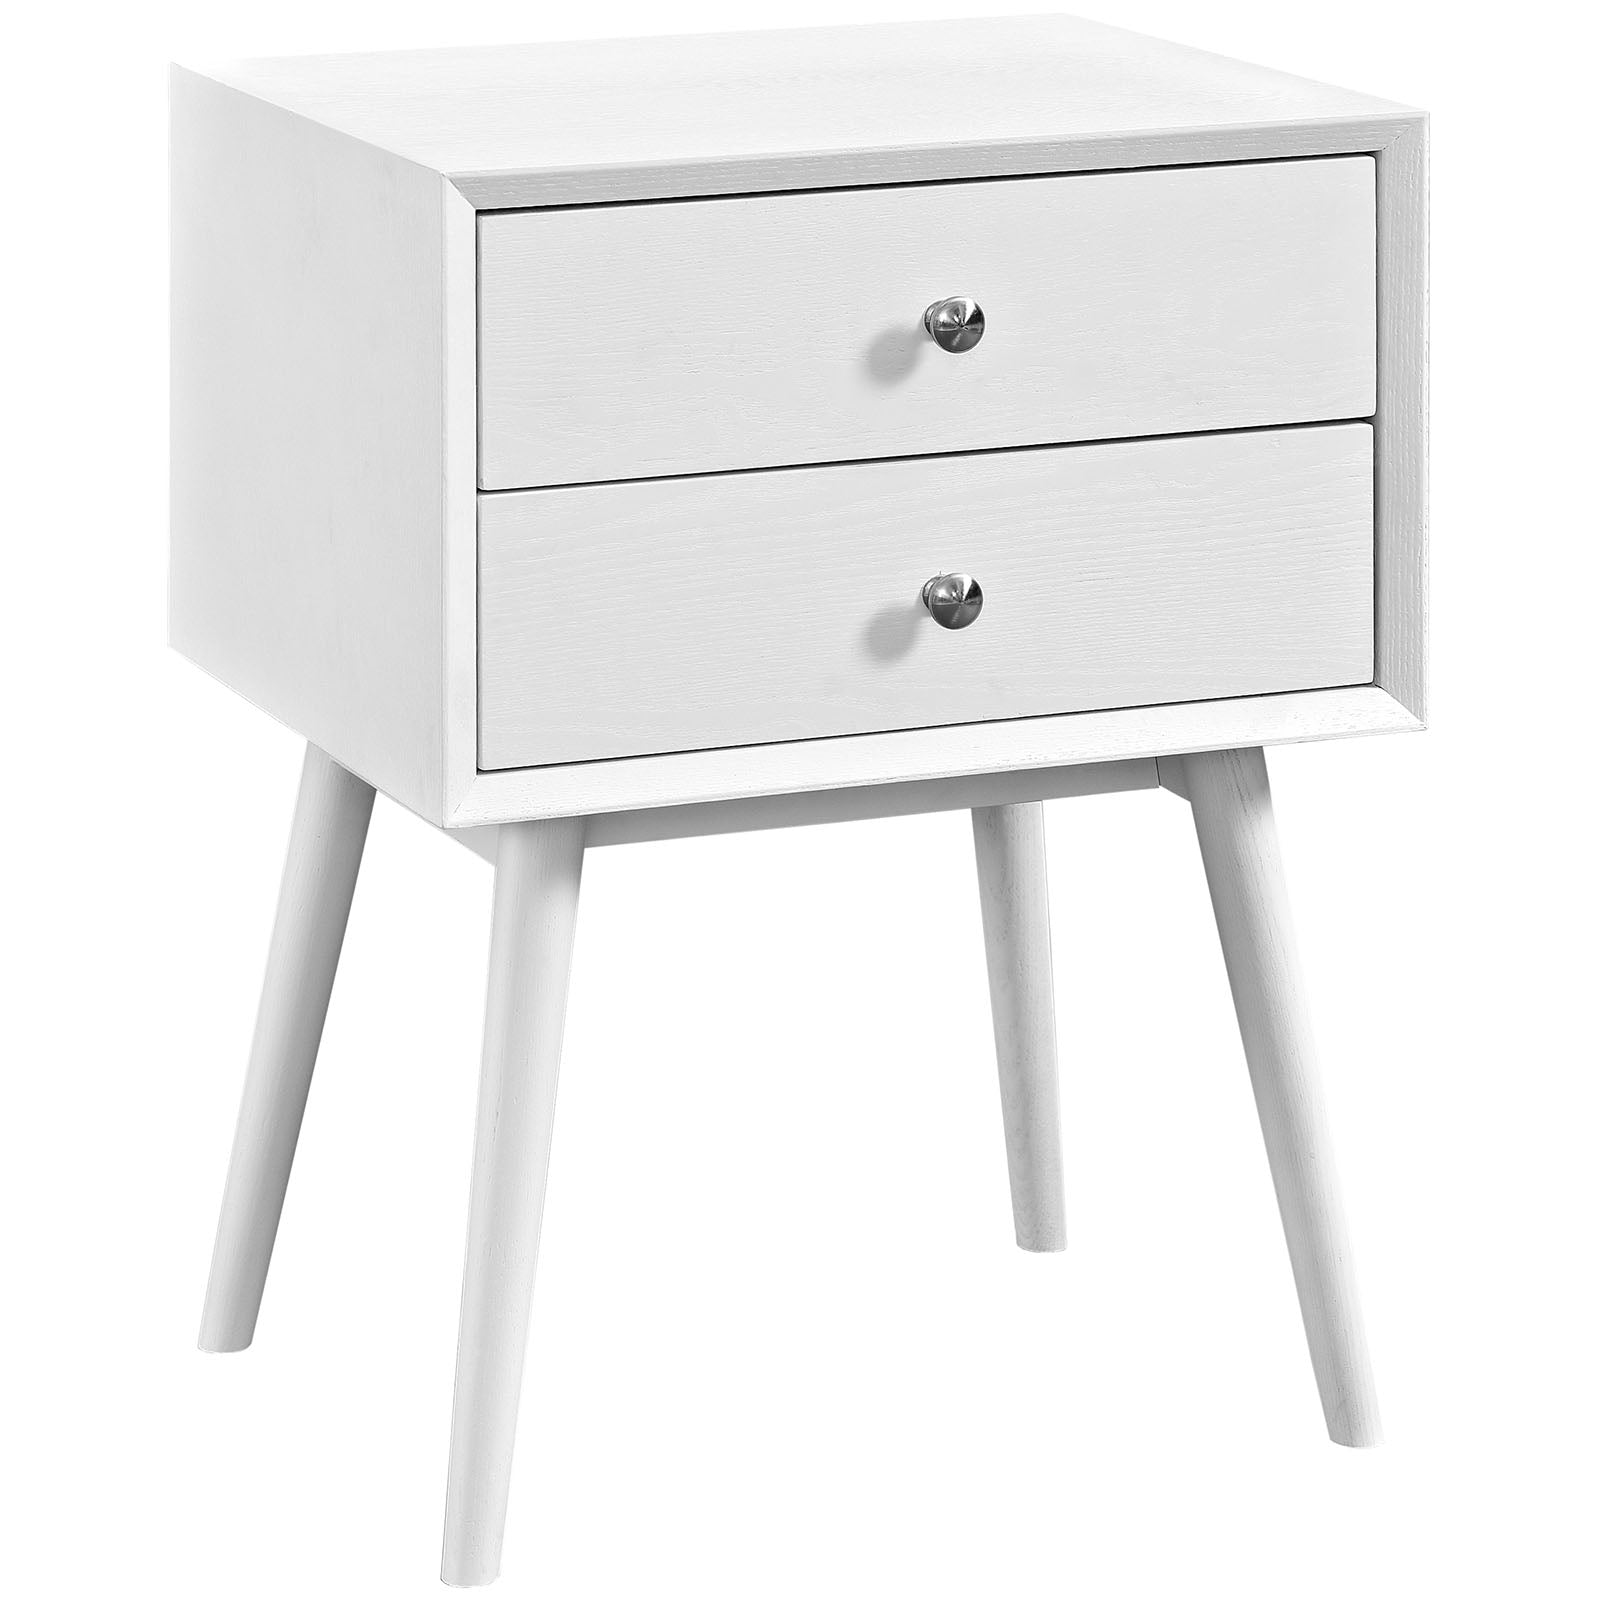 Modway Nightstands & Side Tables - Dispatch Nightstand White